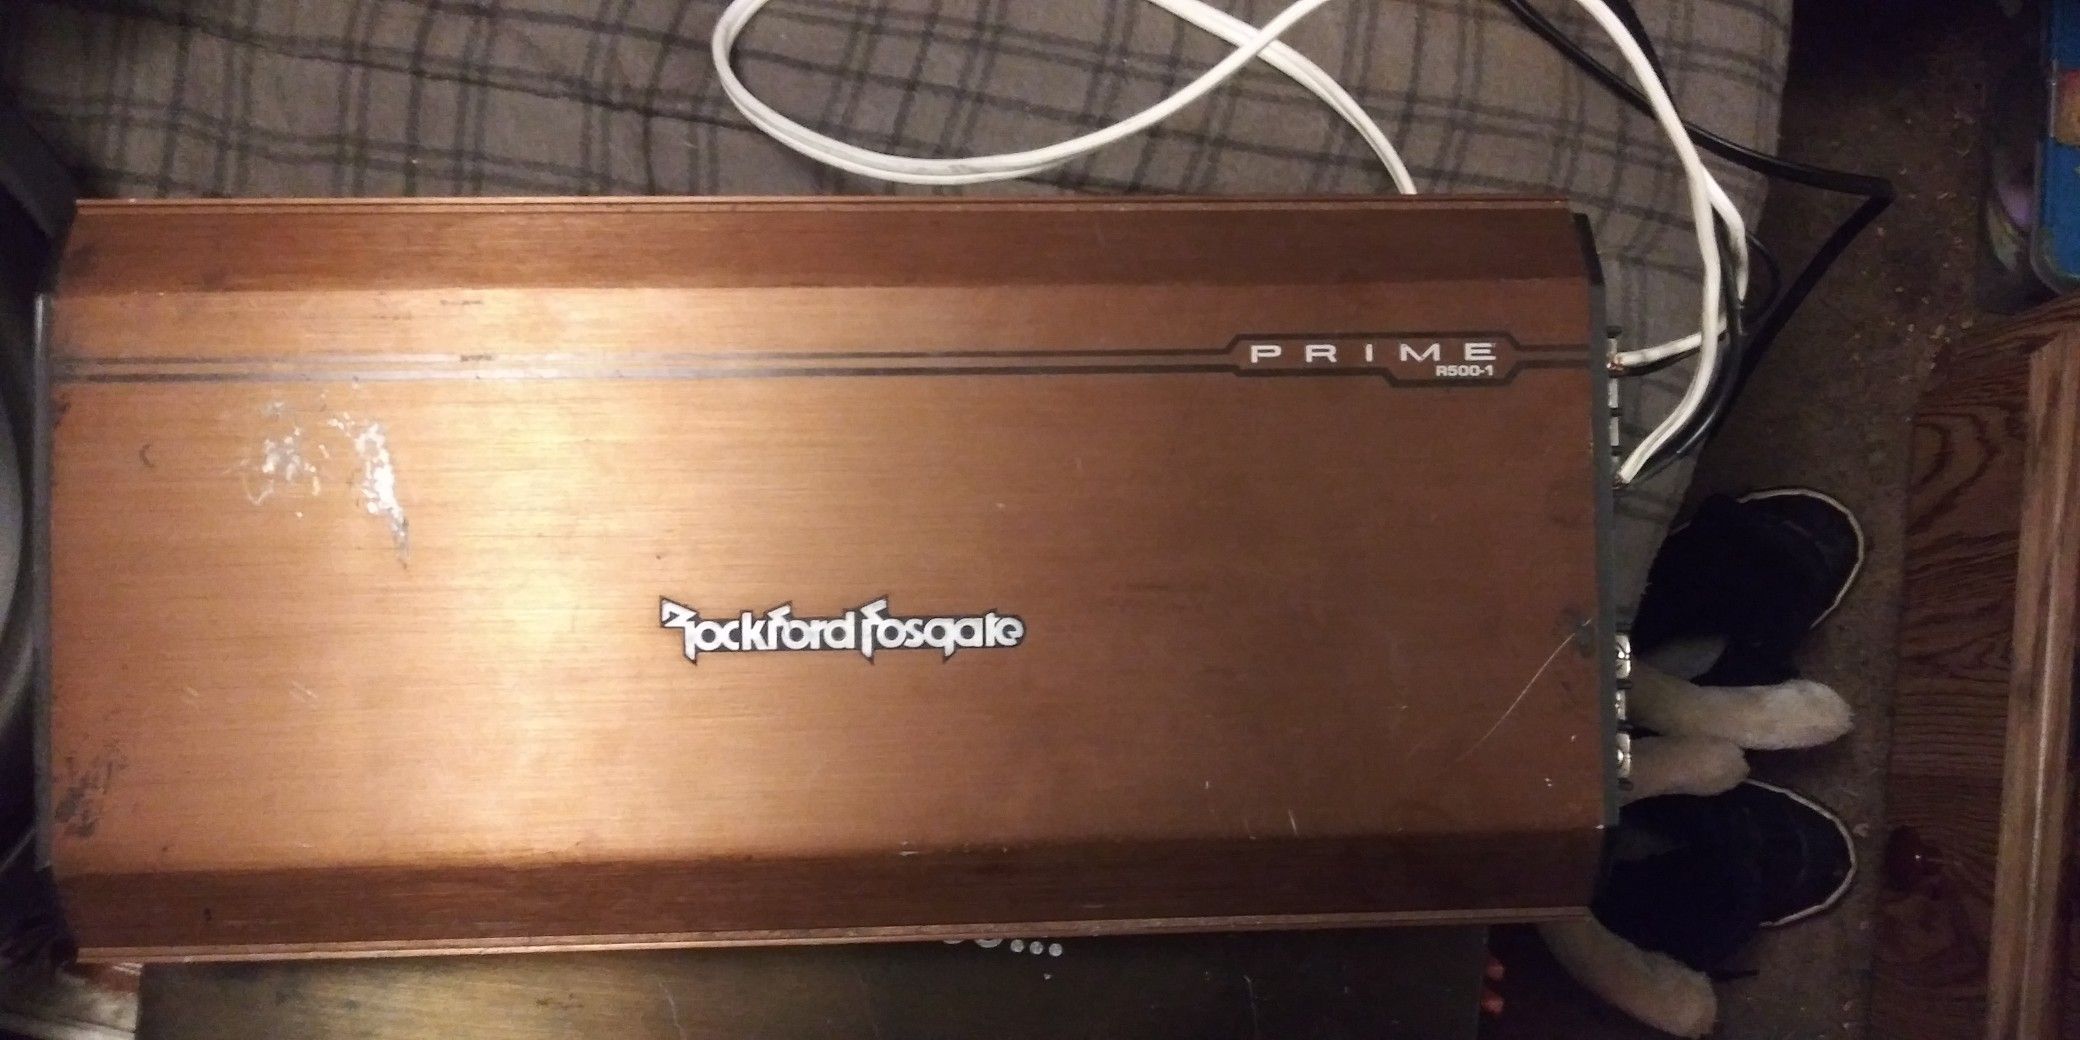 Rockford Fosgate Prime single Channel amplifier that's 500 w. That's a pretty nice amp any questions hit me up